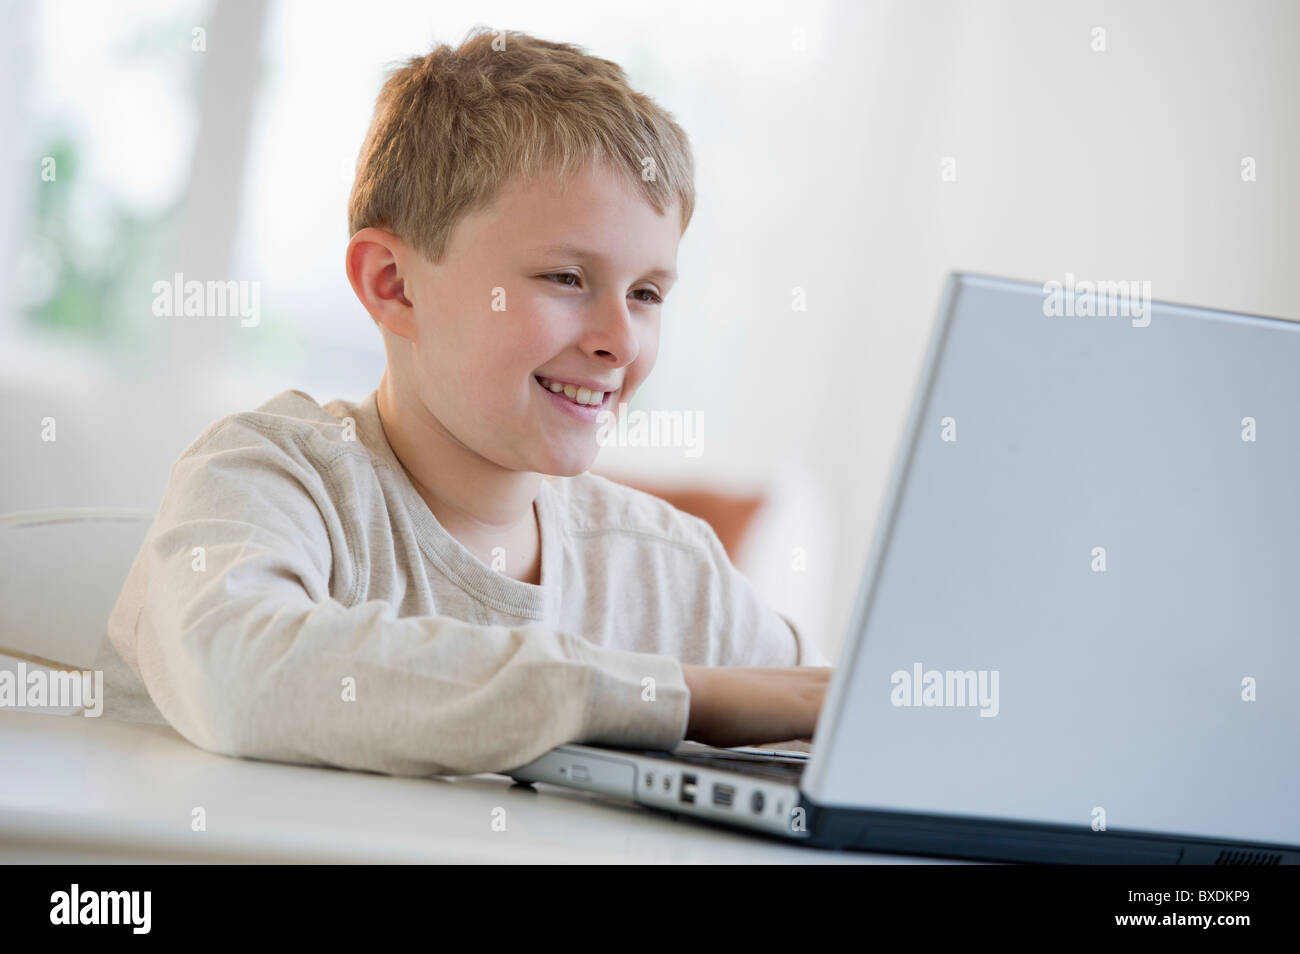 Young boy looking at laptop Stock Photo